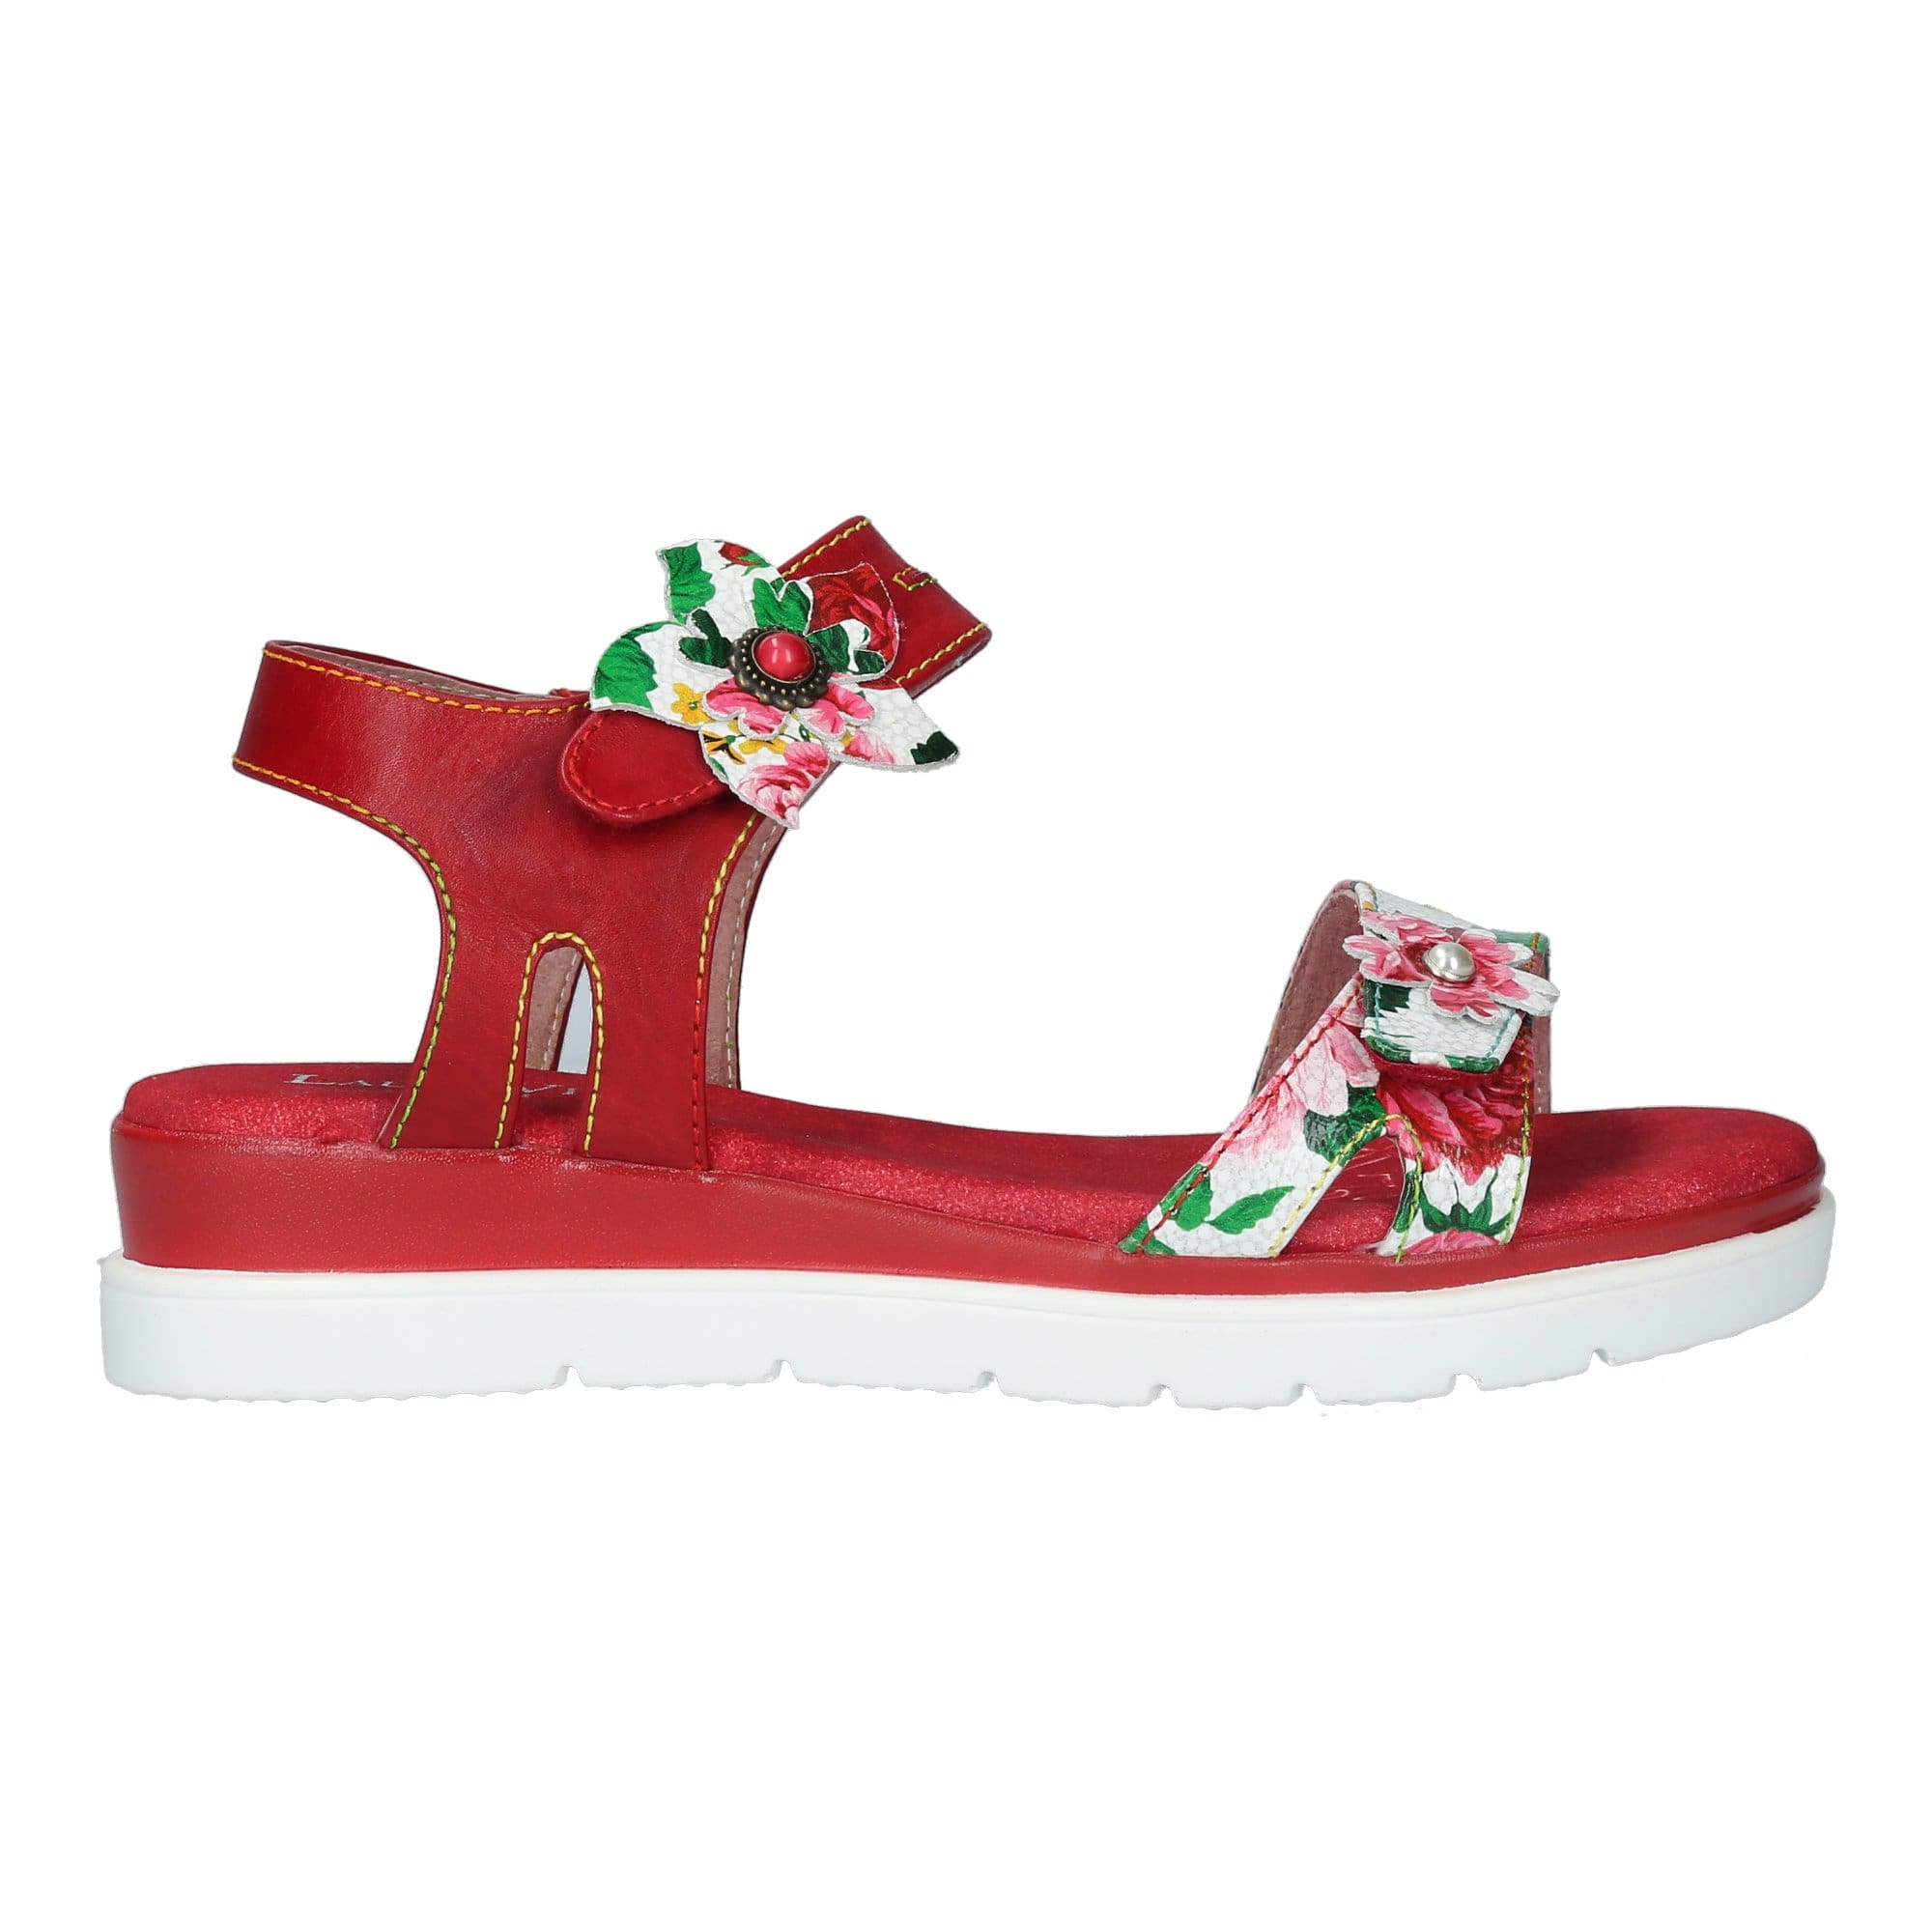 Chaussures JACCEEO 06 - 35 / Rouge - Sandale